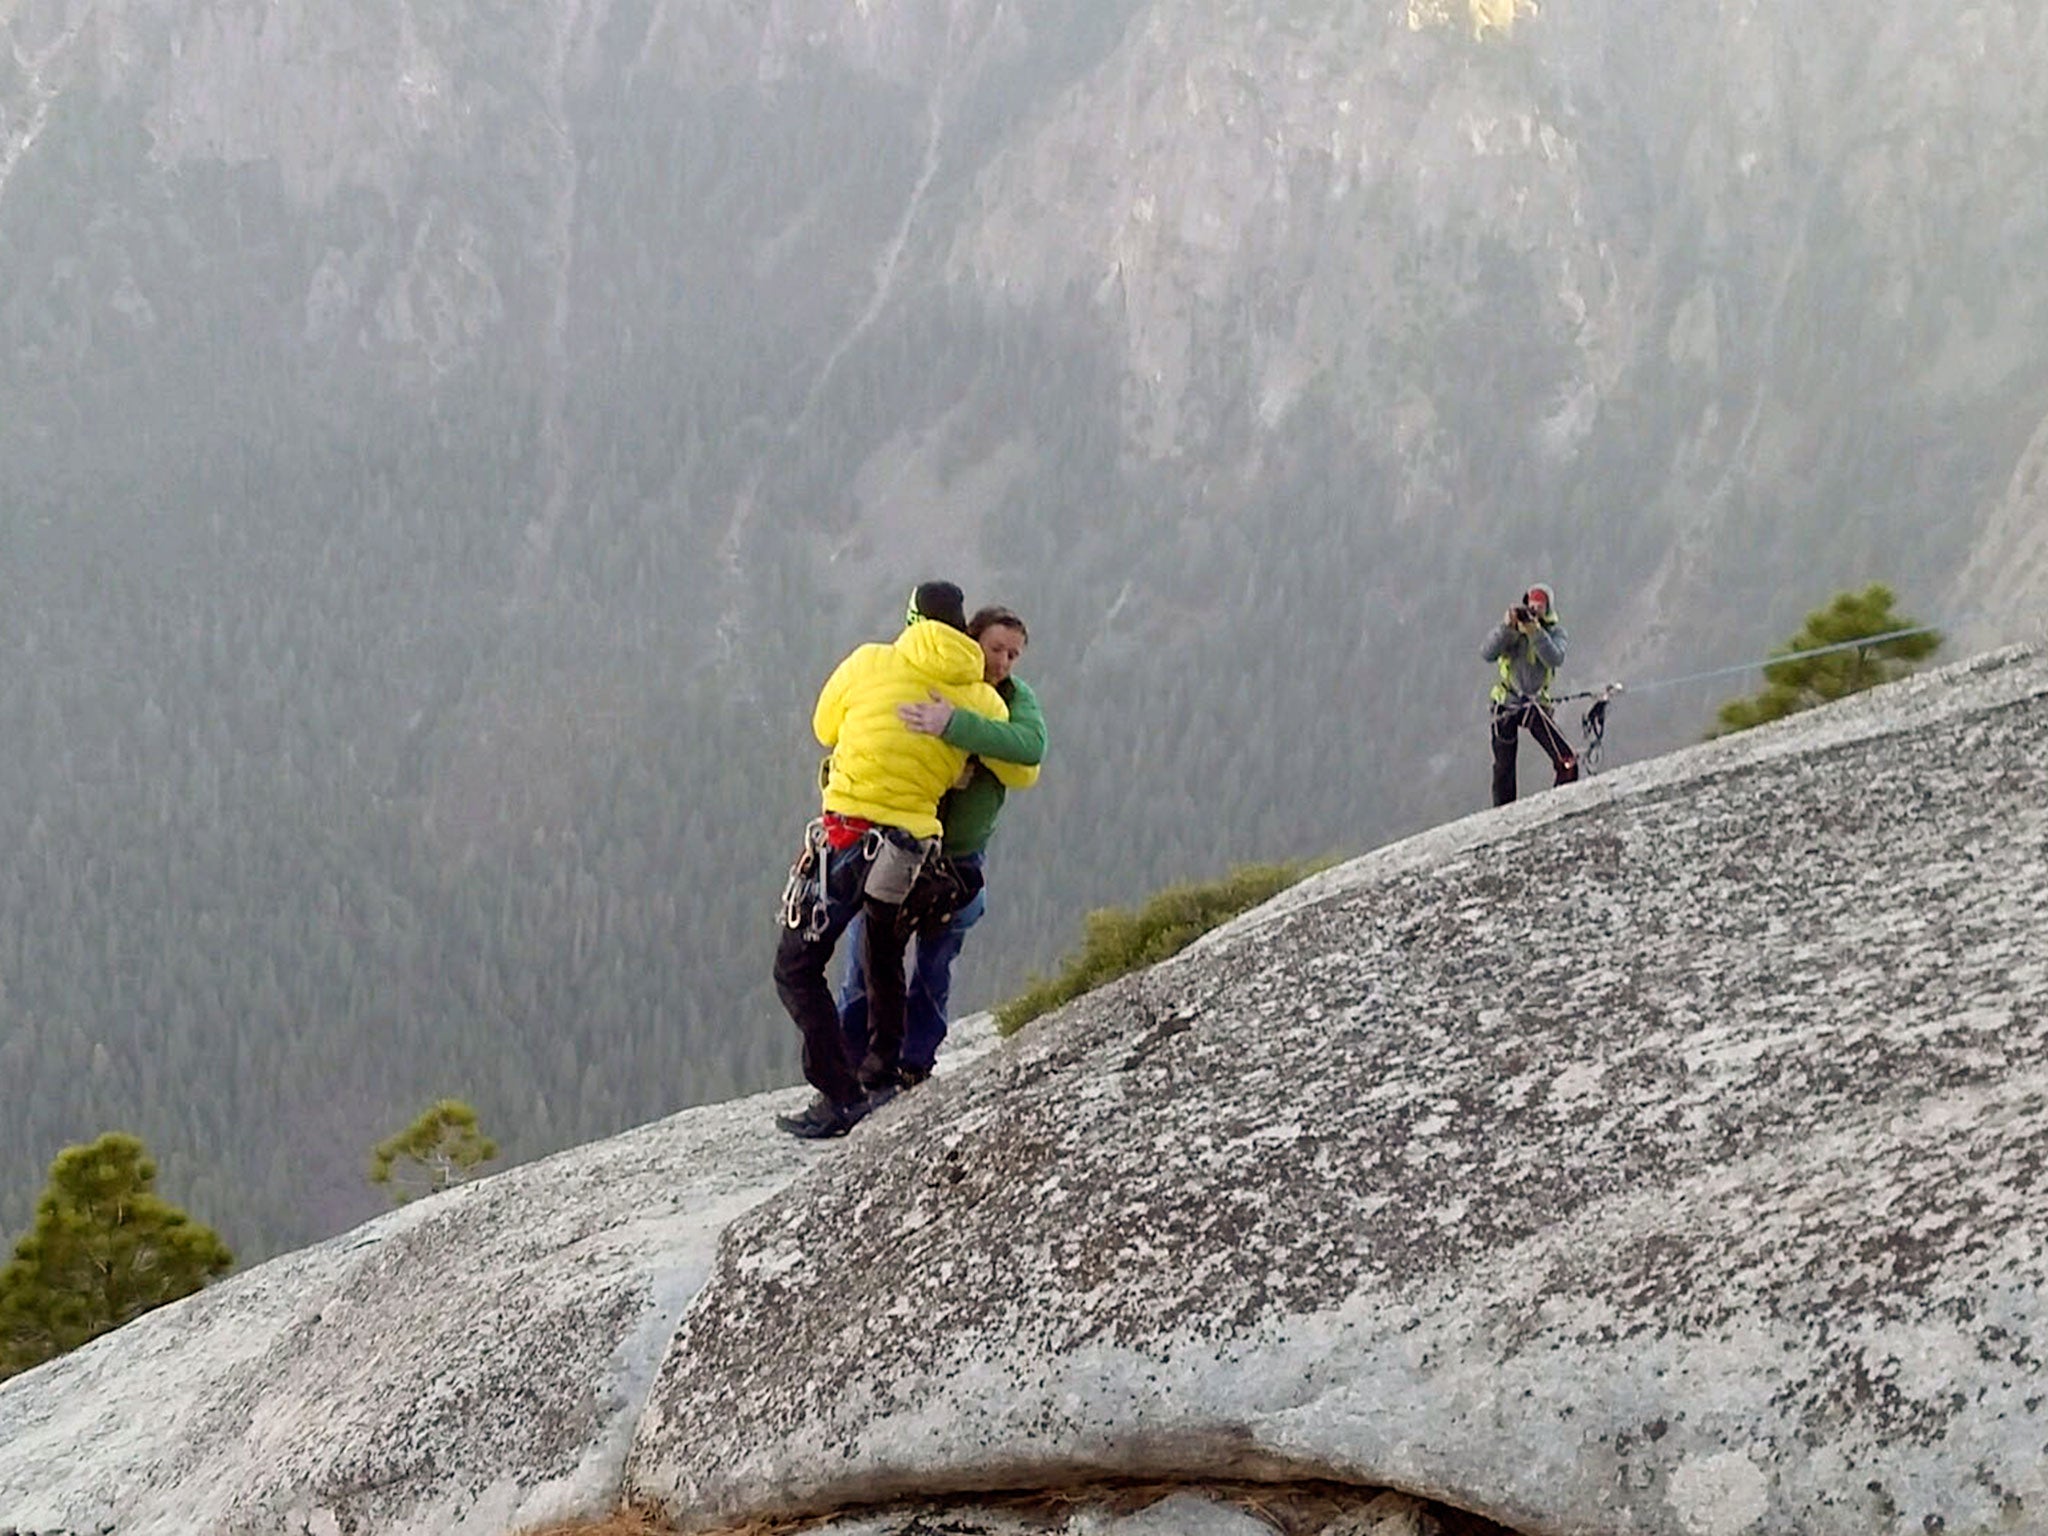 Kevin Jorgeson and partner Tommy Caldwell celebrate after completing the first free climb ascent of El Capitan's Dawn Wall in Yosemite National Park